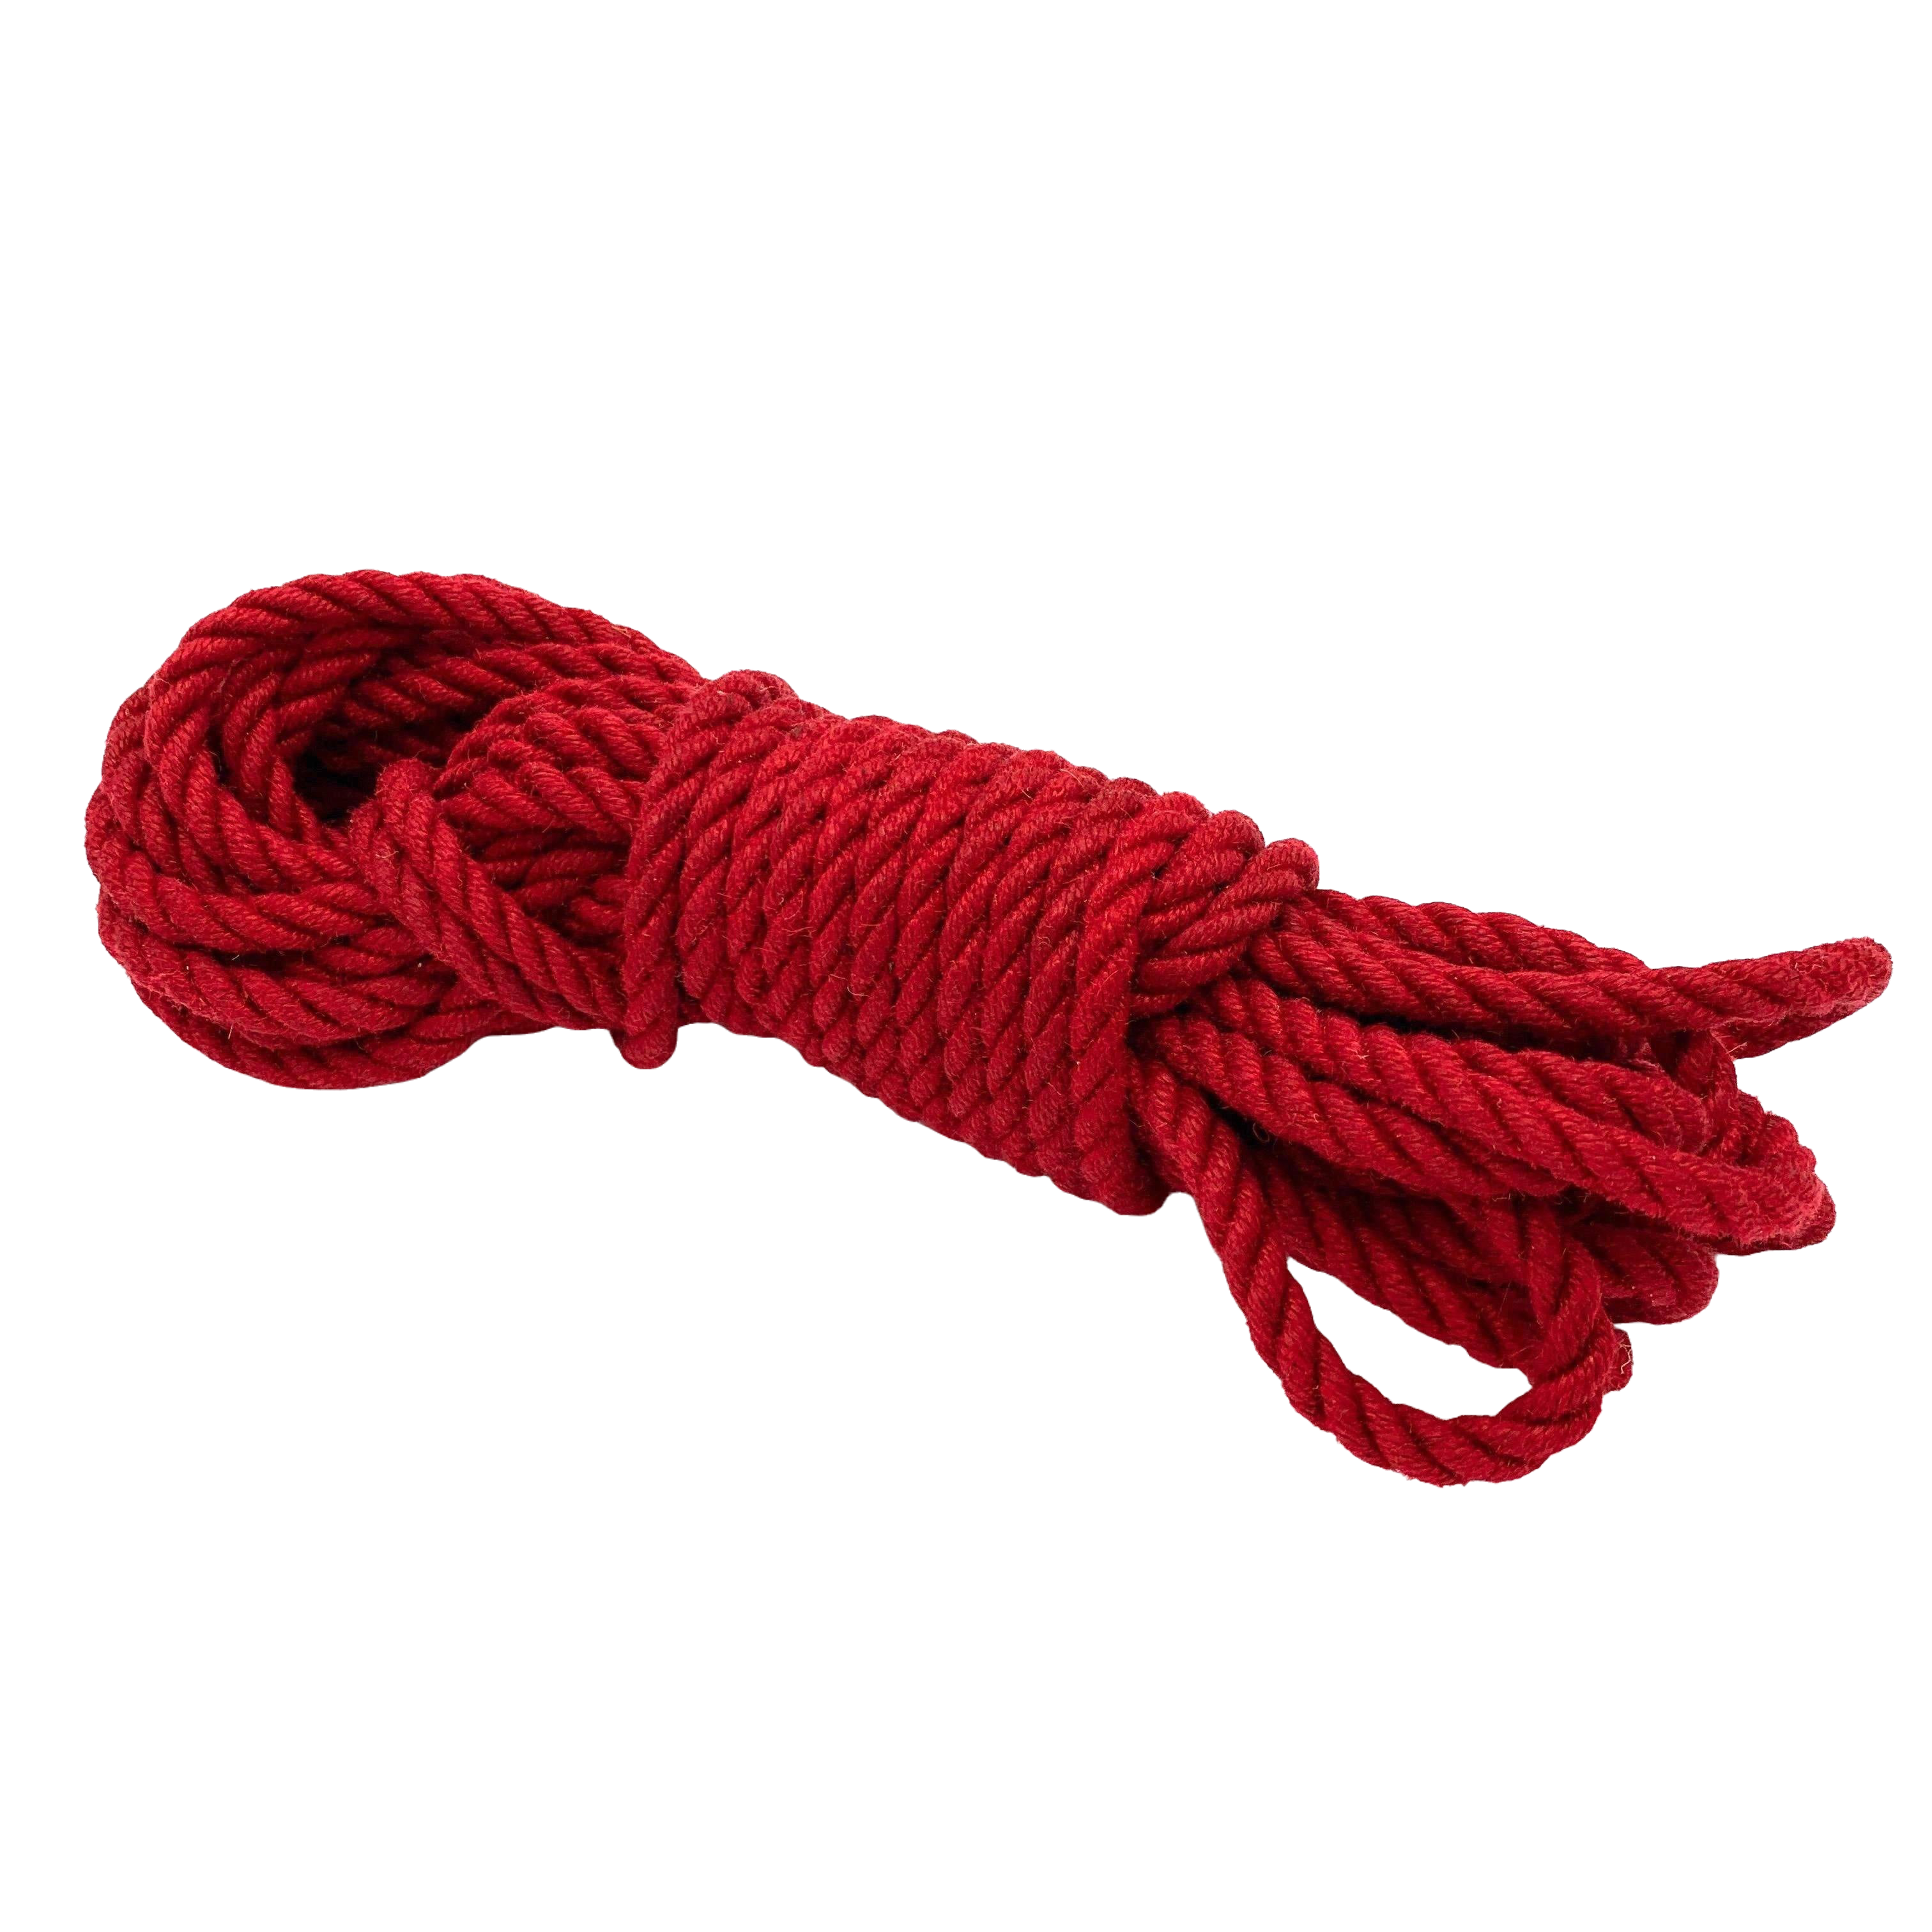 The Concept of Hedonism, Adult Rope Play and BDSM Lifestyle with a Close-up  on a Red Ropes Used in the Japanese Erotic Stock Photo - Image of icon,  scrapbooking: 289768186